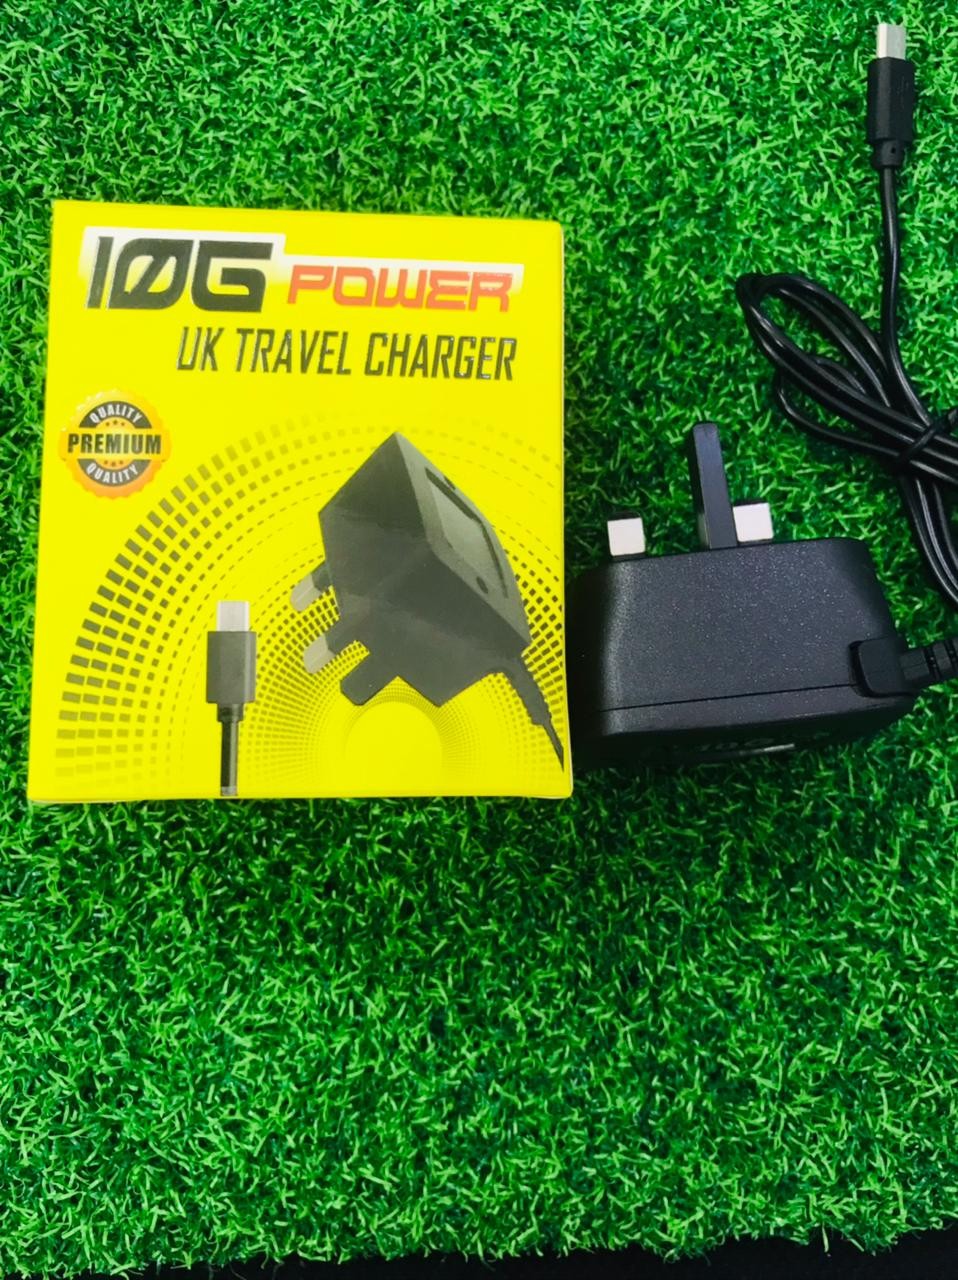 UK Travel Charger